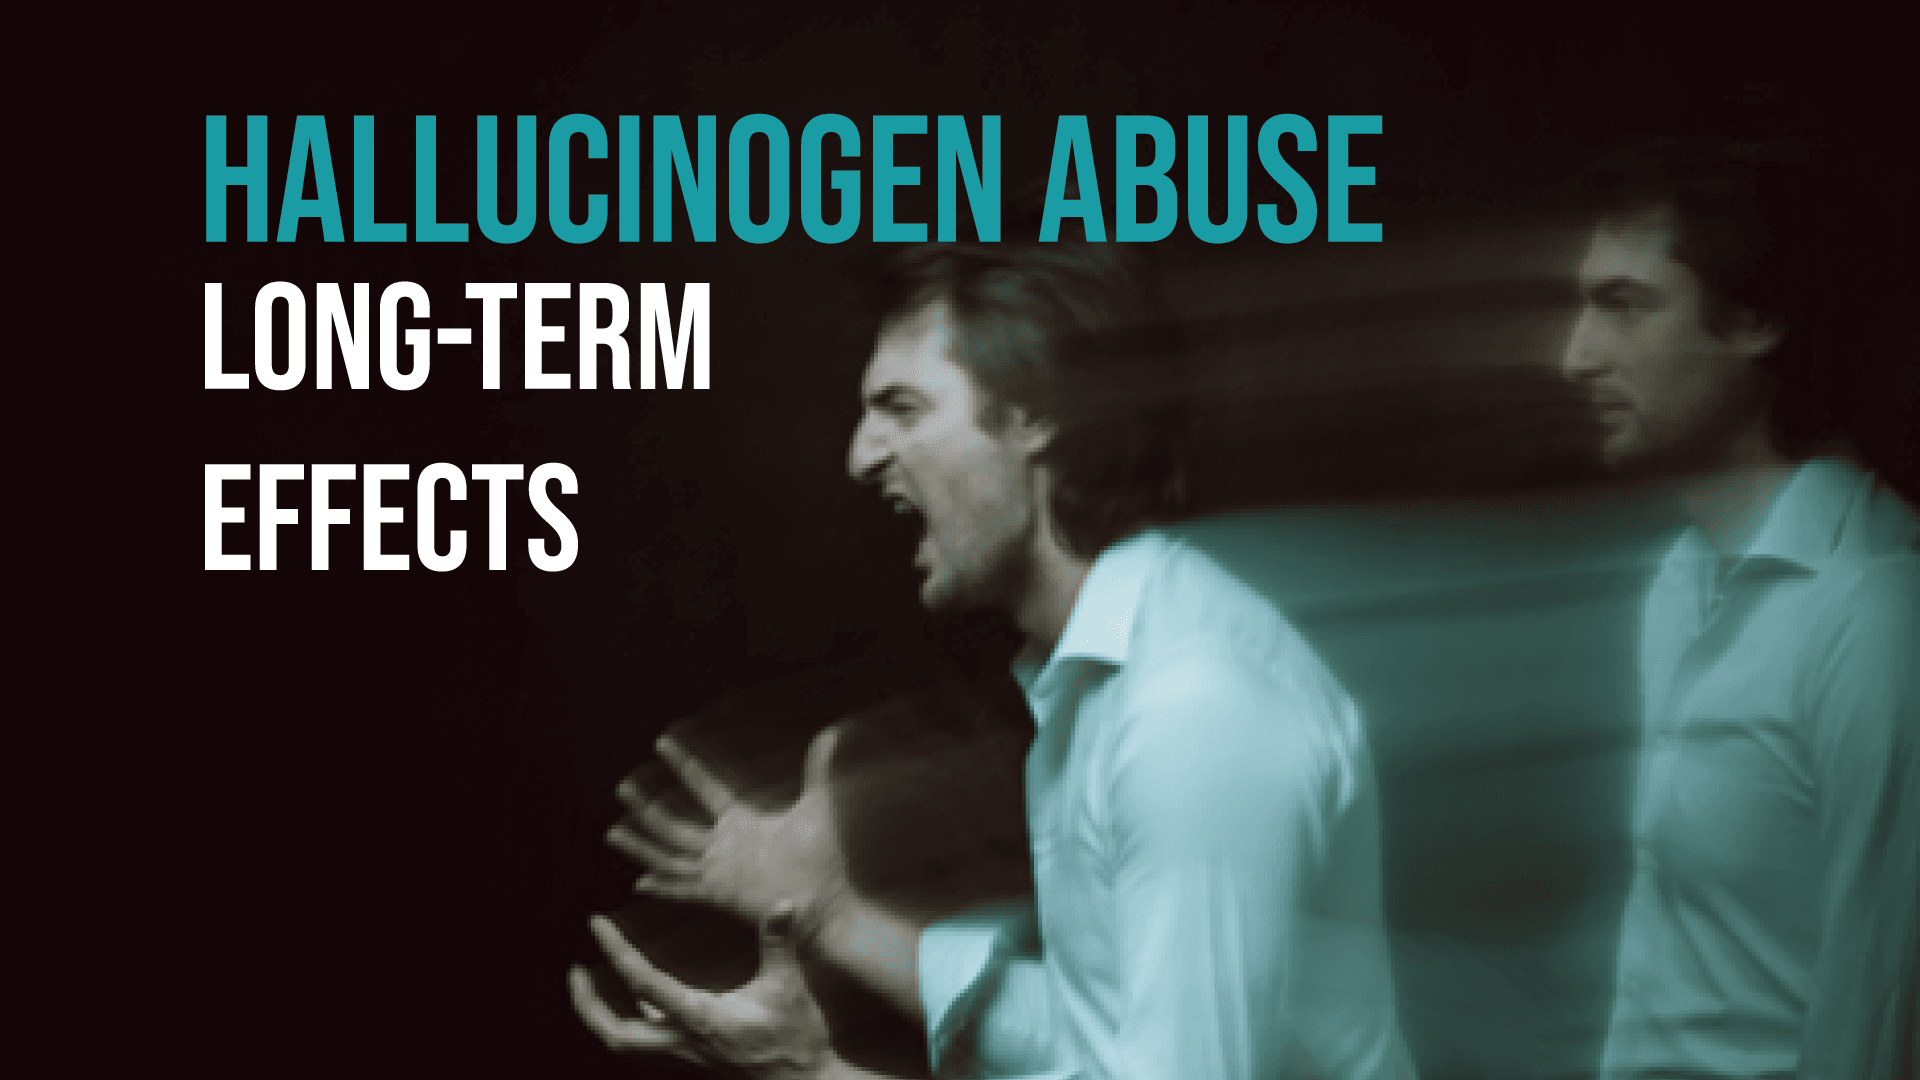 What Are The Long-Term Effects of Hallucinogen Abuse?